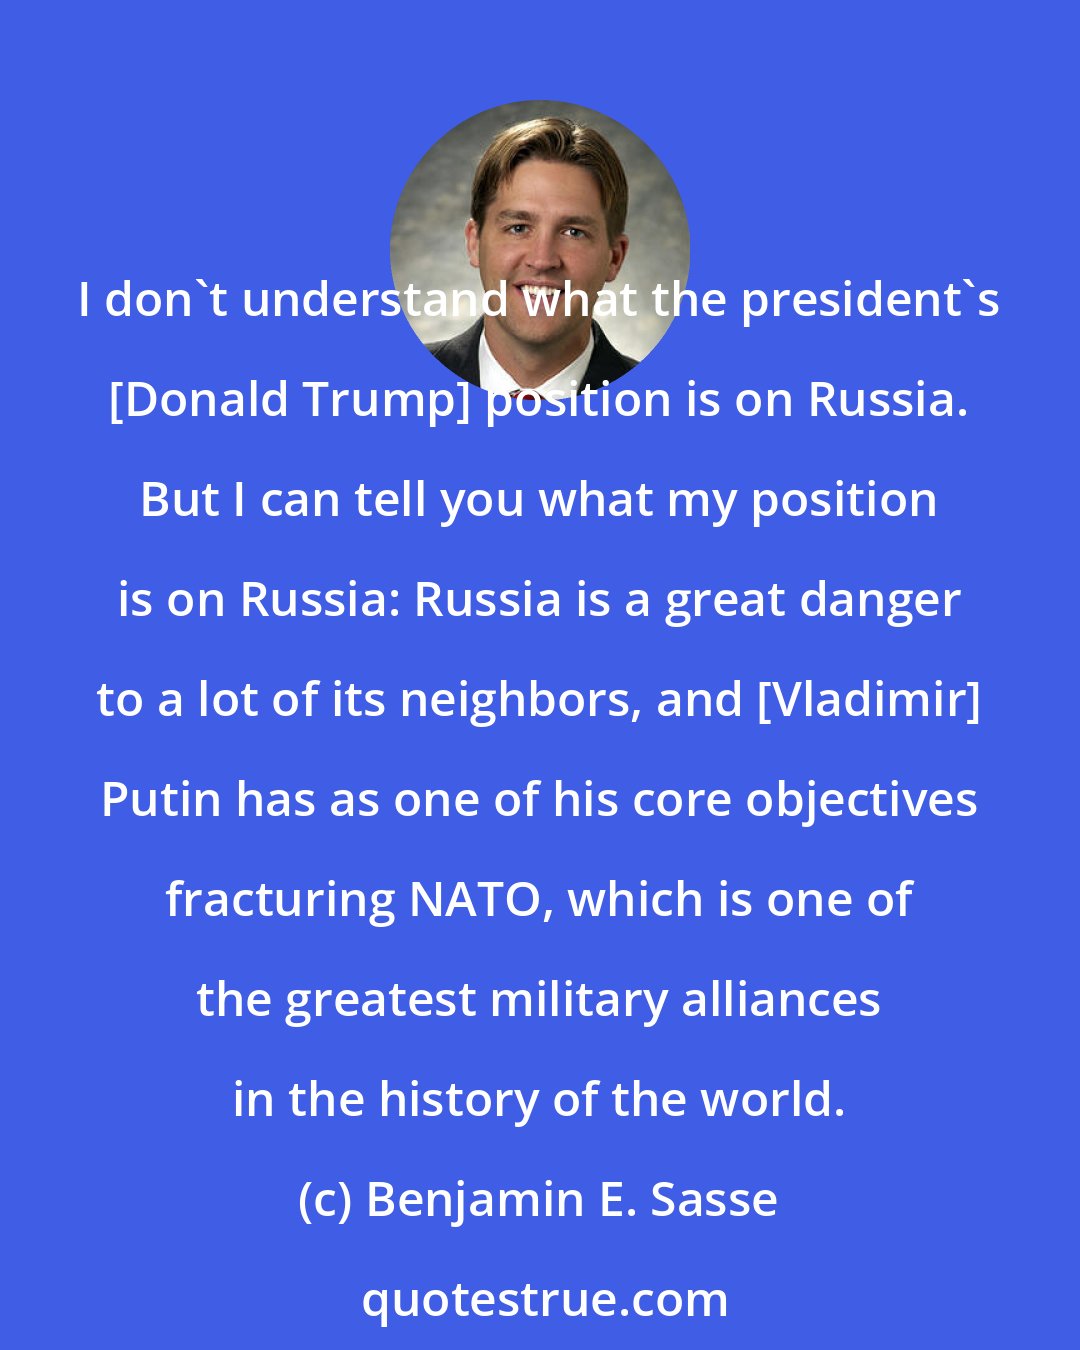 Benjamin E. Sasse: I don't understand what the president's [Donald Trump] position is on Russia. But I can tell you what my position is on Russia: Russia is a great danger to a lot of its neighbors, and [Vladimir] Putin has as one of his core objectives fracturing NATO, which is one of the greatest military alliances in the history of the world.